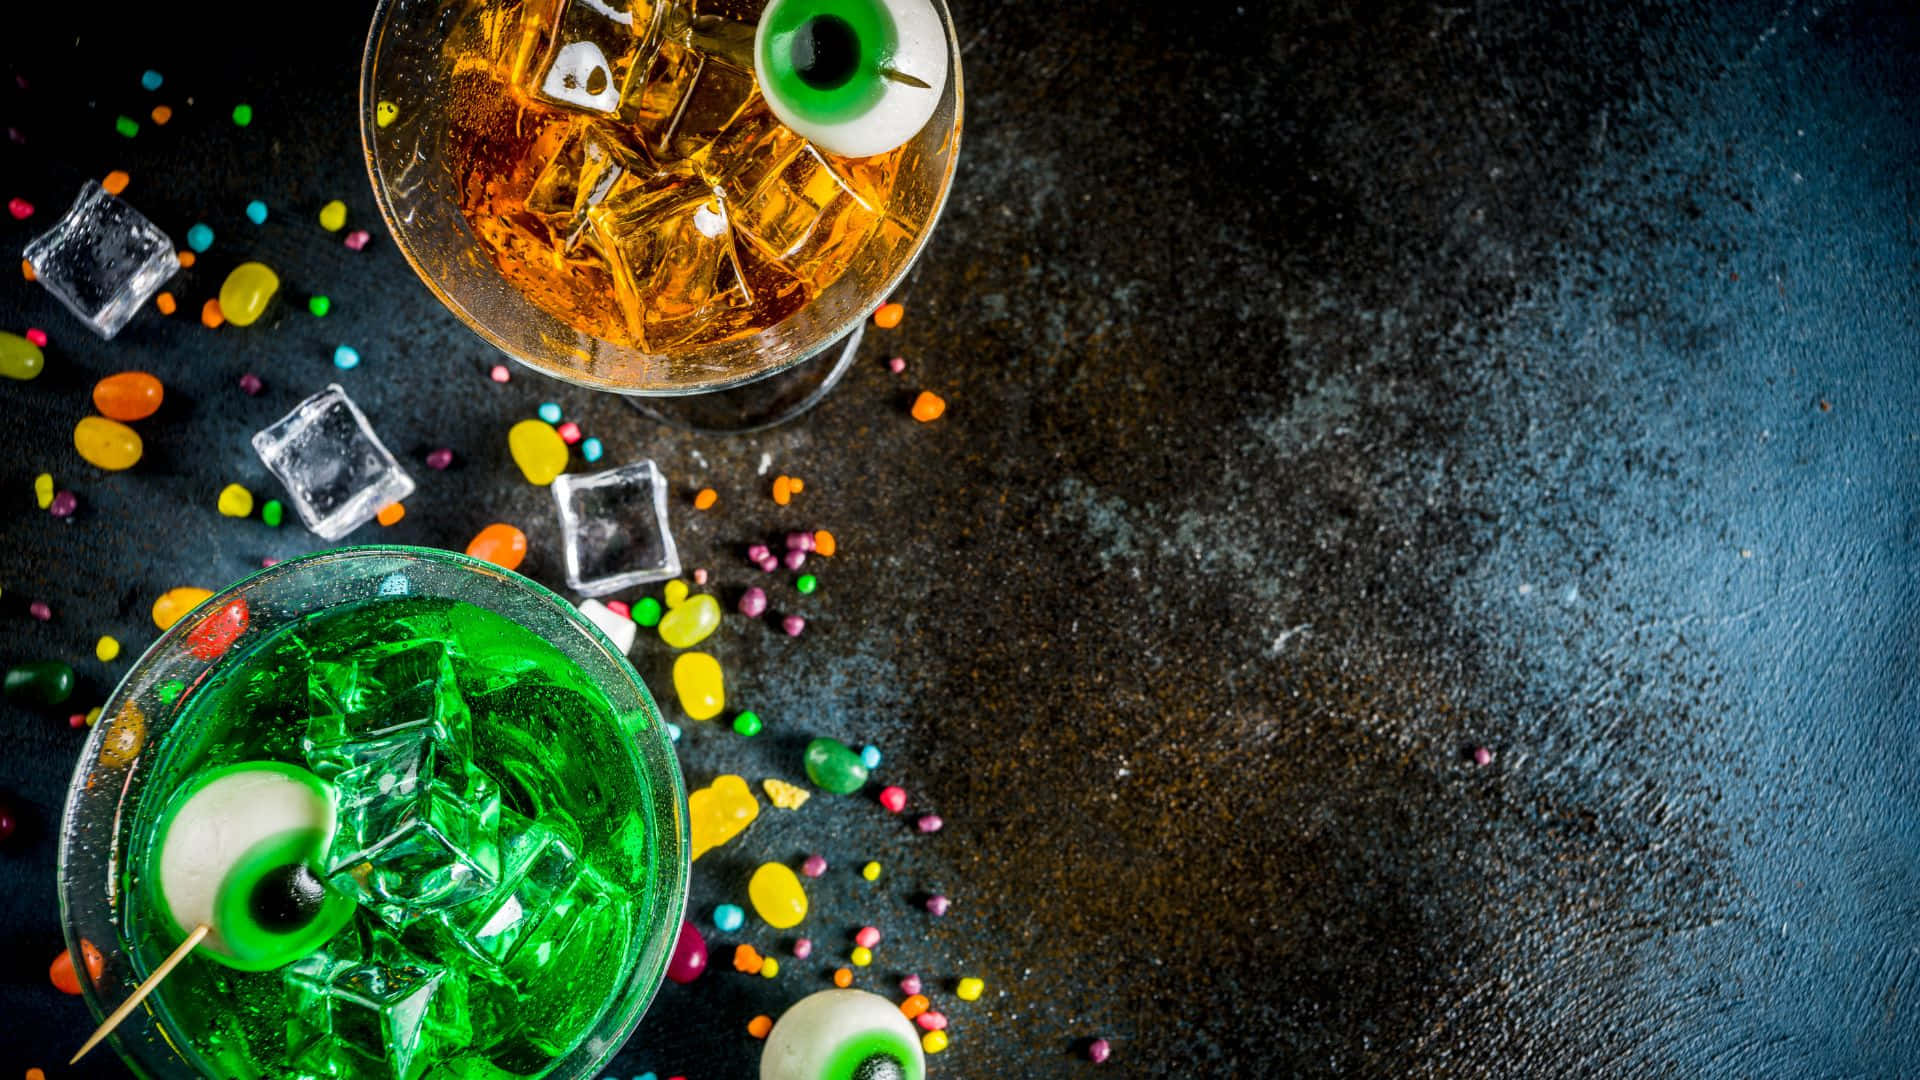 Add some eeriness to your party with spooky cocktails! Wallpaper